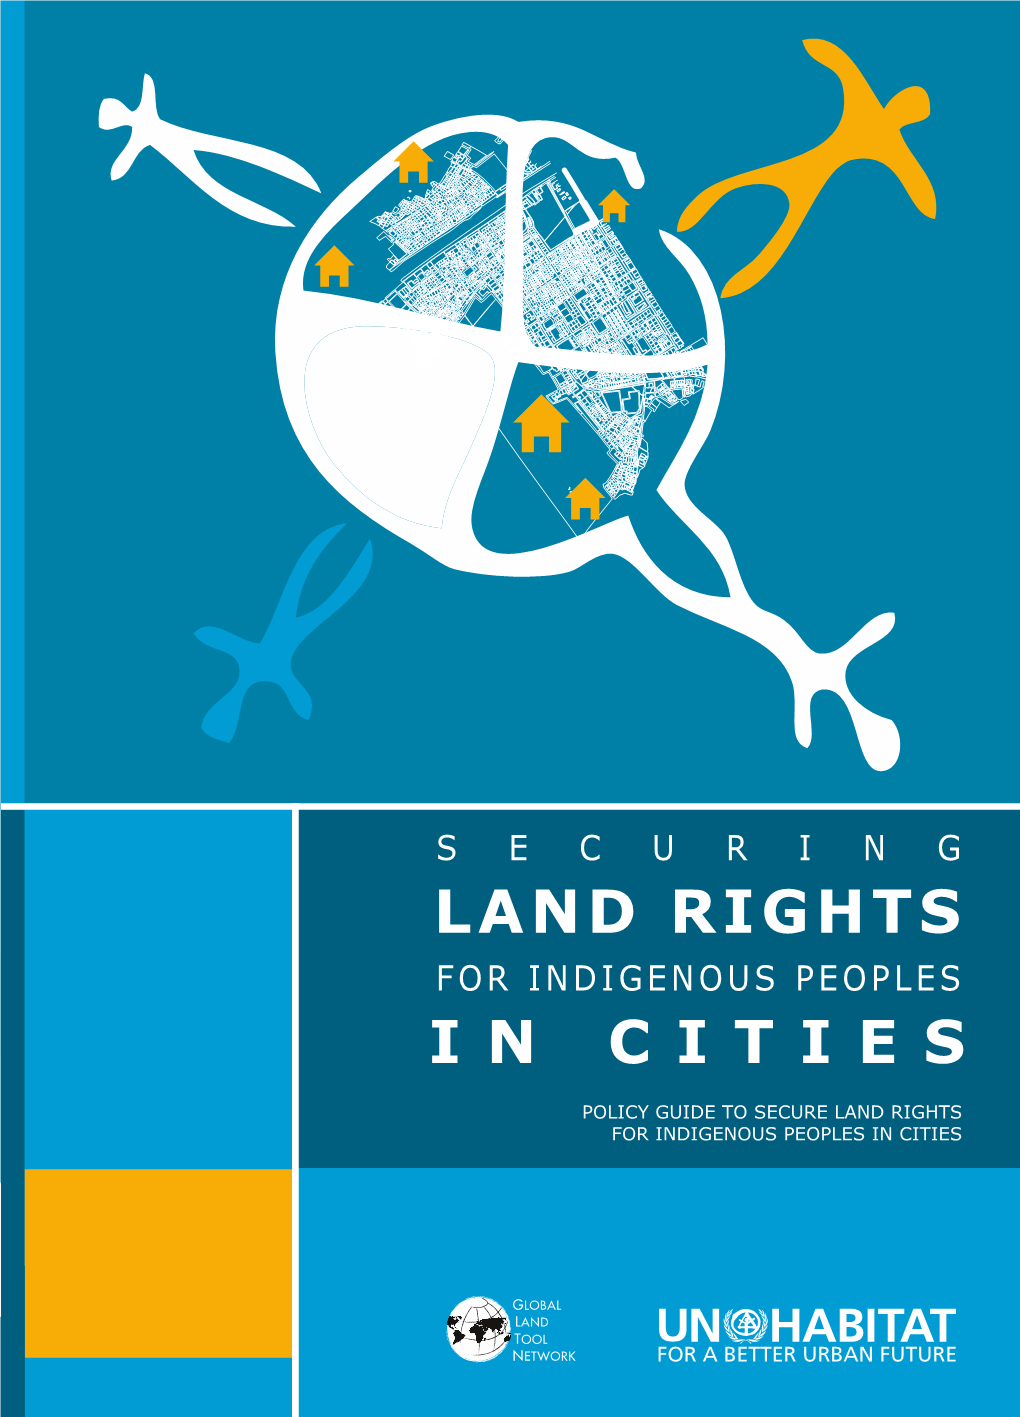 Secure Land Rights for Indigenous Peoples in Cities